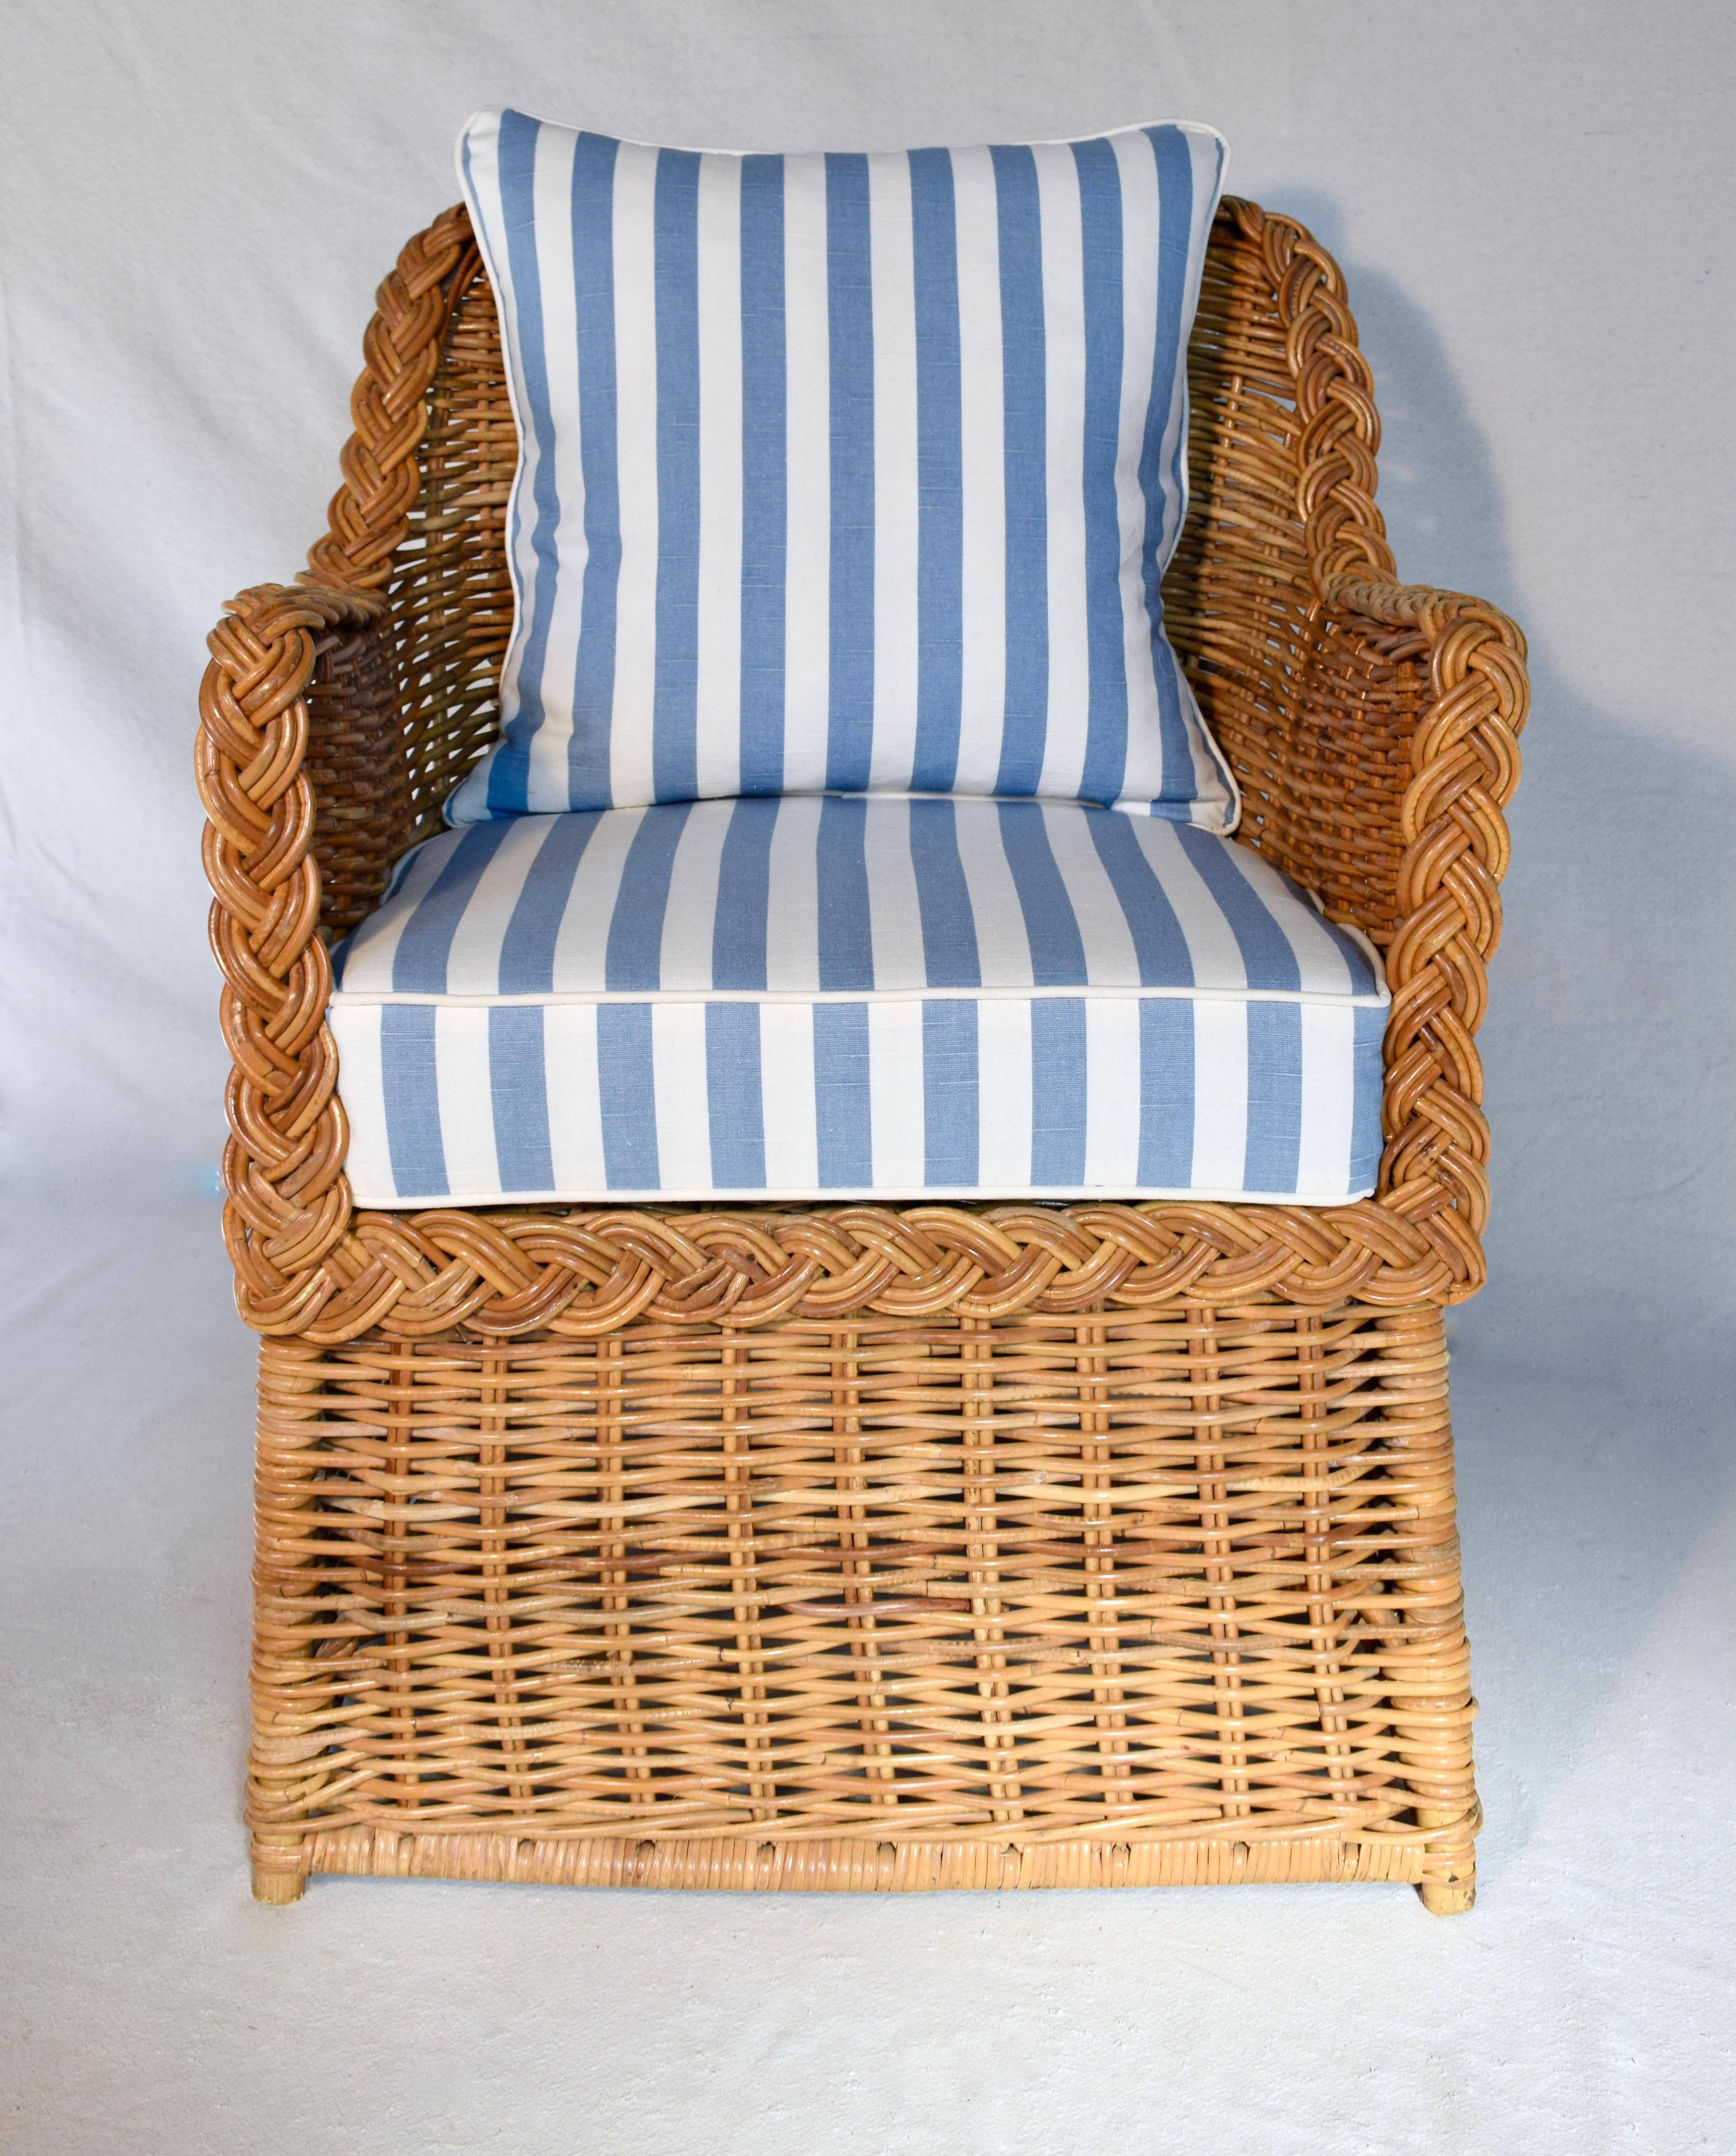 Michael Taylor braided wicker rattan armchair with new seat & goose down back cushions upholstered in new stock vintage Ralph Lauren sky blue and white wide stripe cotton linen. Seat: 17